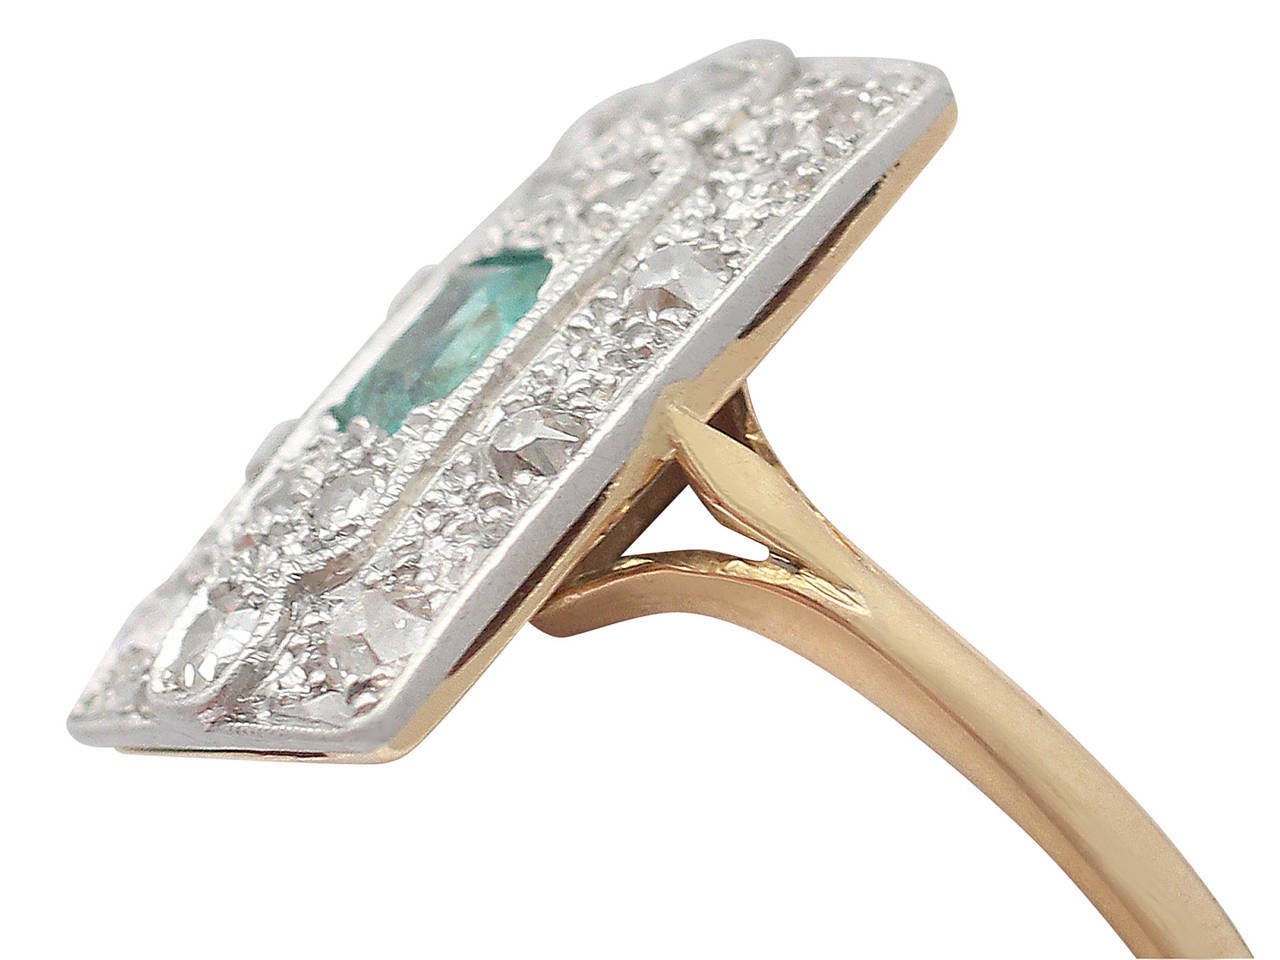 A very fine 0.32 carat emerald and 0.56 carat diamond, 18 karat yellow gold, platinum set dress ring; part of our antique jewelry / estate jewelry collections

This fine antique emerald dress ring has been crafted in 18k yellow gold and